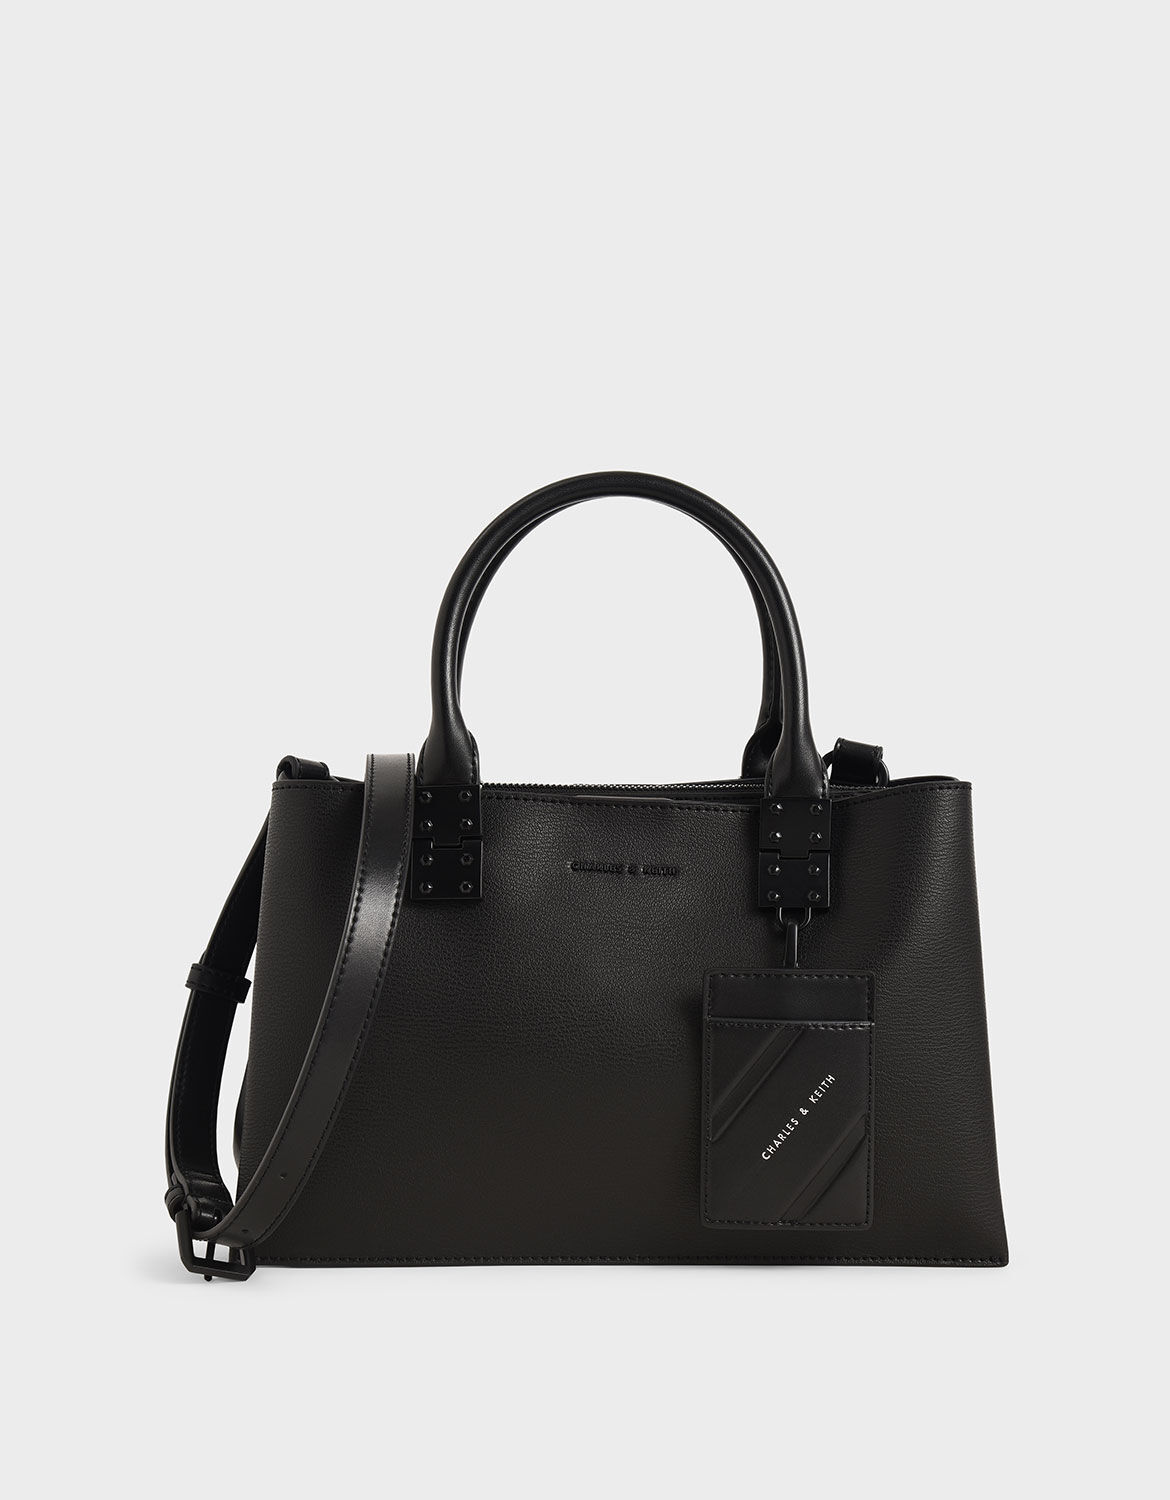 Ultra Matte Black Double Top Handle Structured Bag - CHARLES & KEITH SG